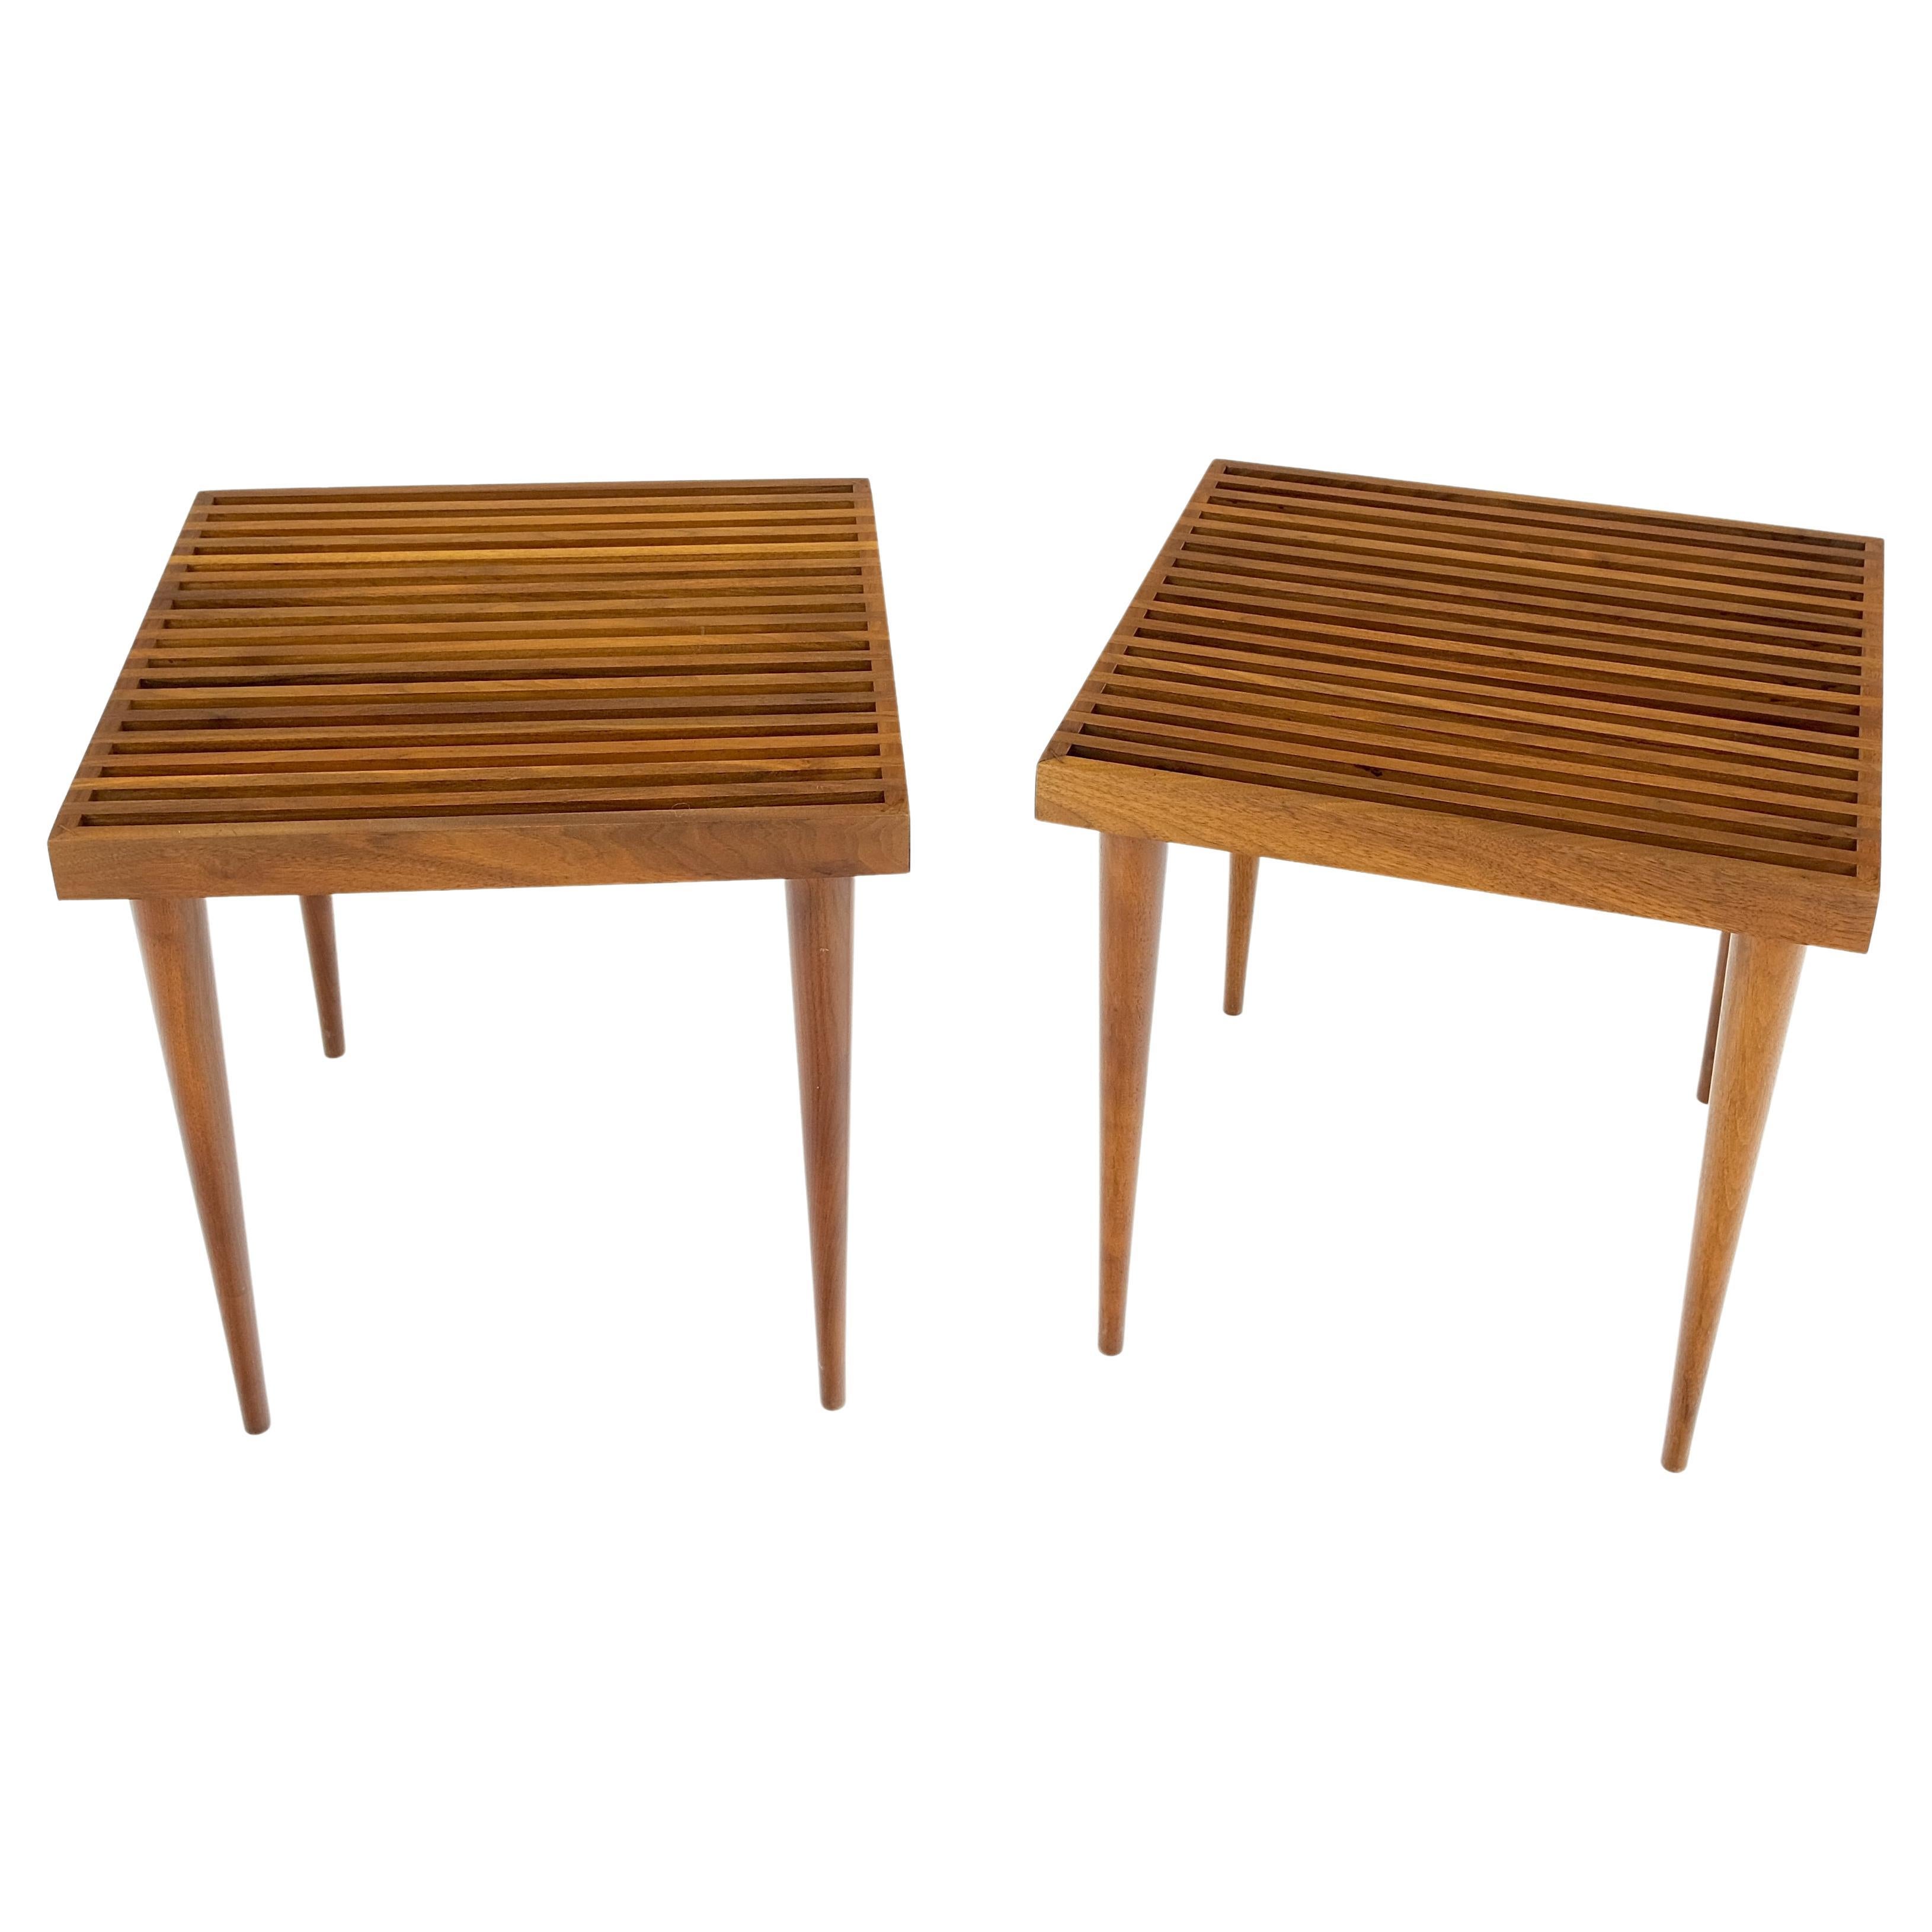 Pair Square  Mel Smilow Slatted Solid Walnut  Modern Benches Side Tables MINT! For Sale